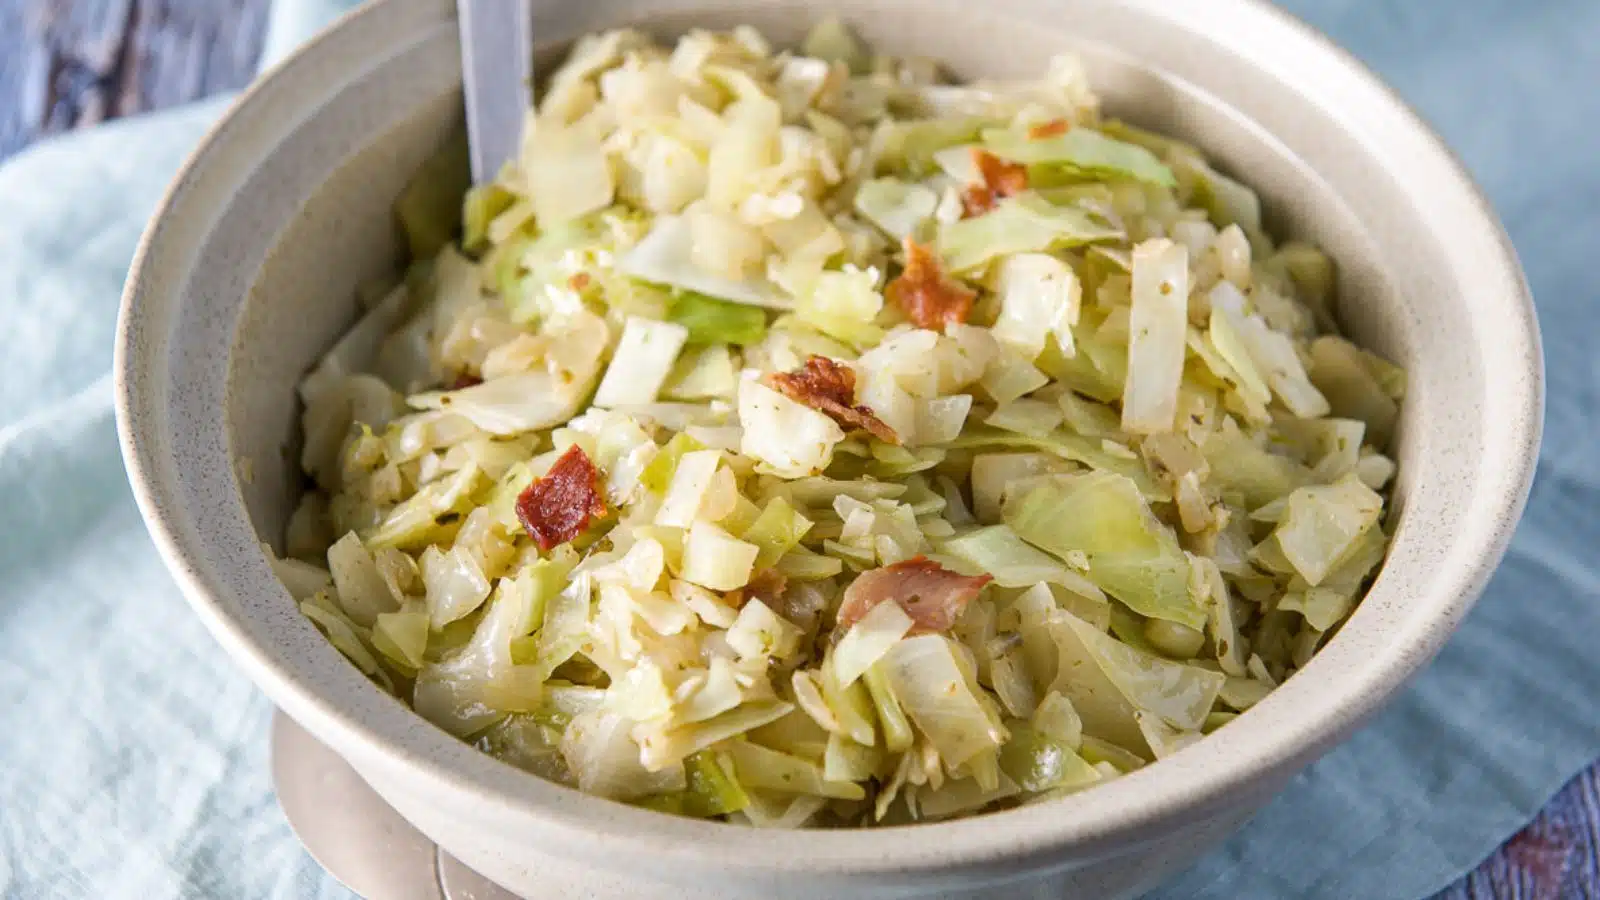 A bowl with cabbage and bacon on a blue napkin